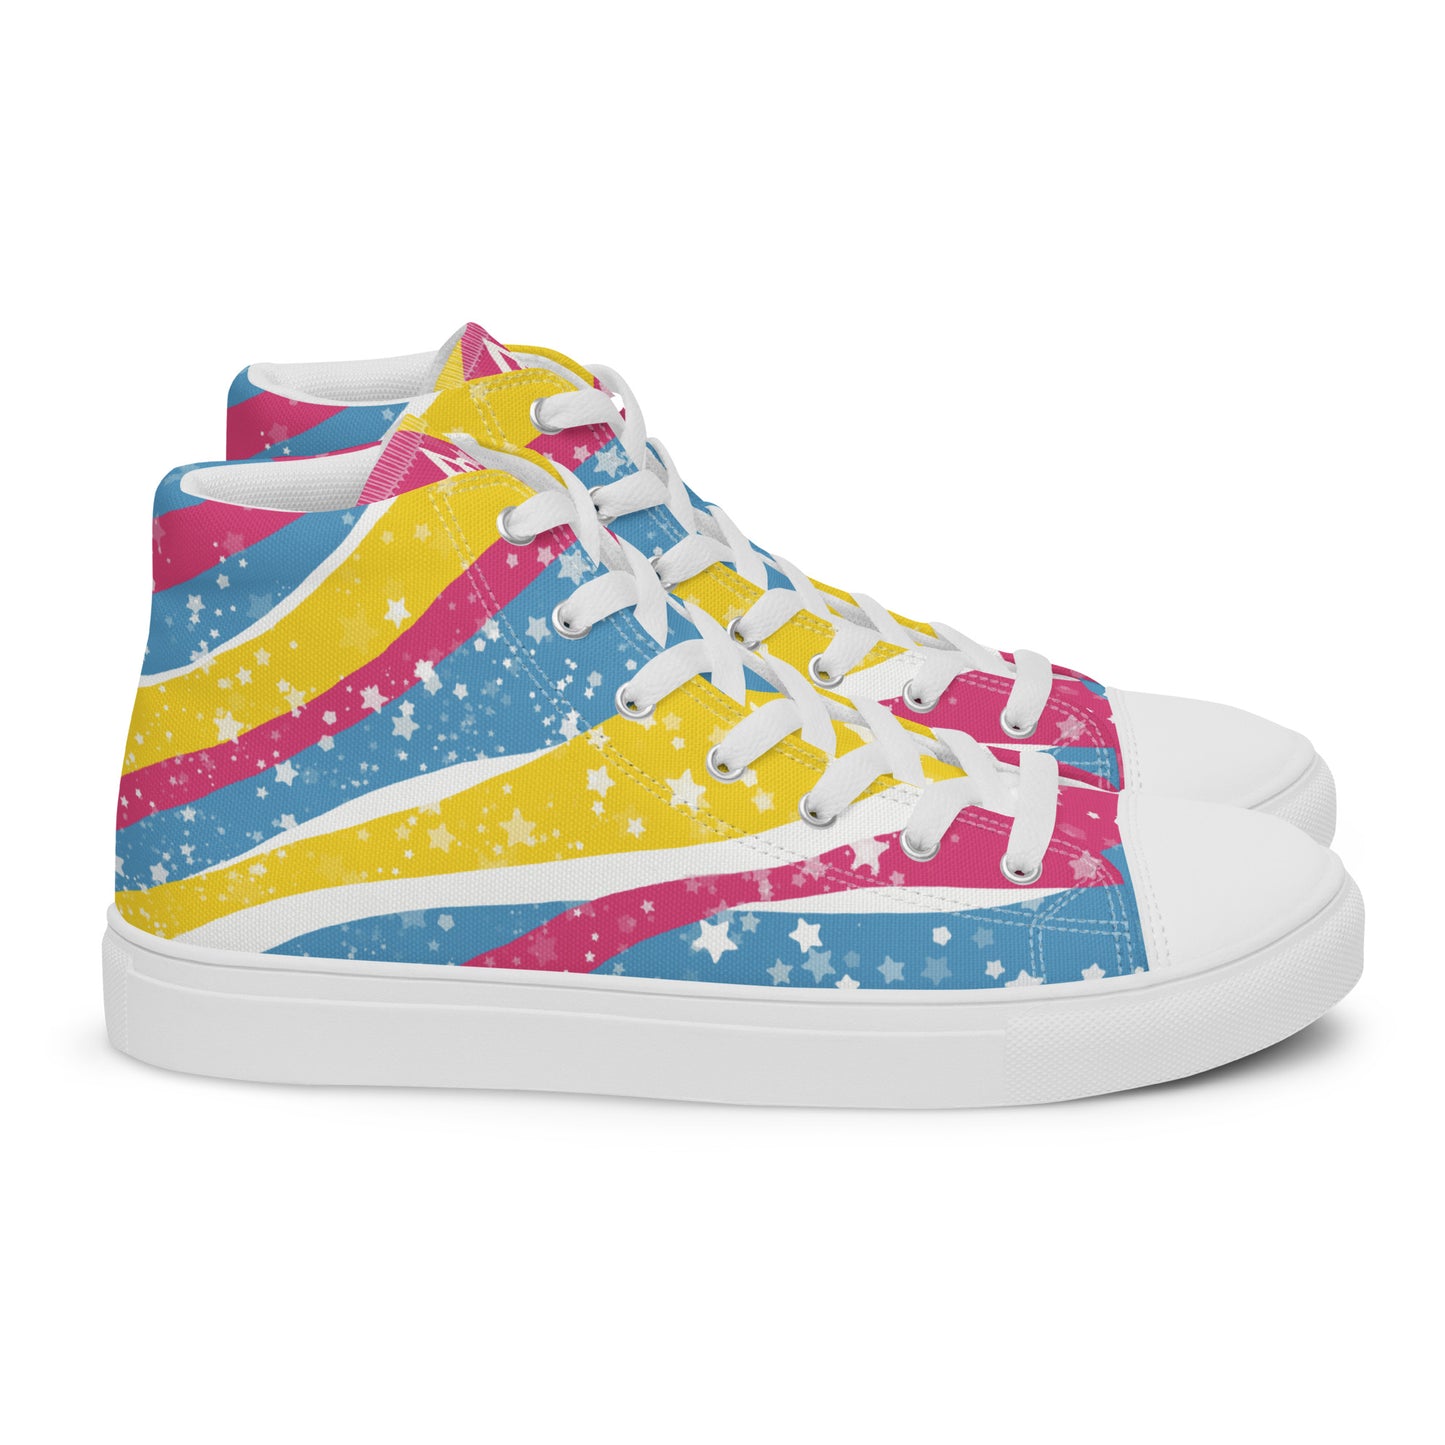 Right view: a pair of high top shoes with pink, yellow, and blue ribbons that get larger from heel to laces, white stars, and the Aras Sivad logo on the tongue.